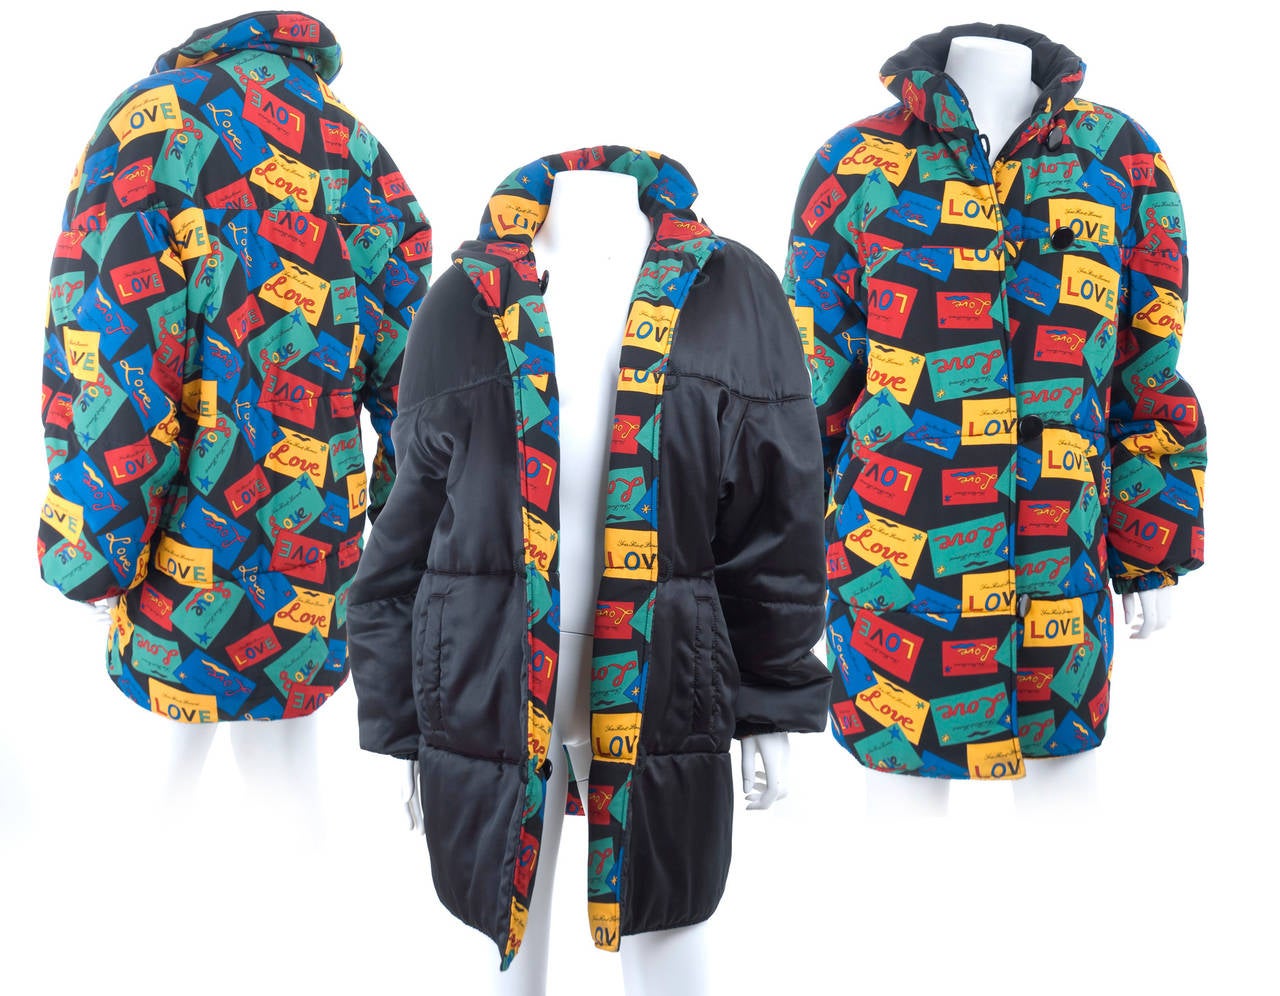 1990 Yves Saint Laurent Reversible LOVE Puffer Jacket.
Colorful print on one side and black on the other.
From the YSL Variation line in excellent condition.
Size M 
Measurements:
Length 33